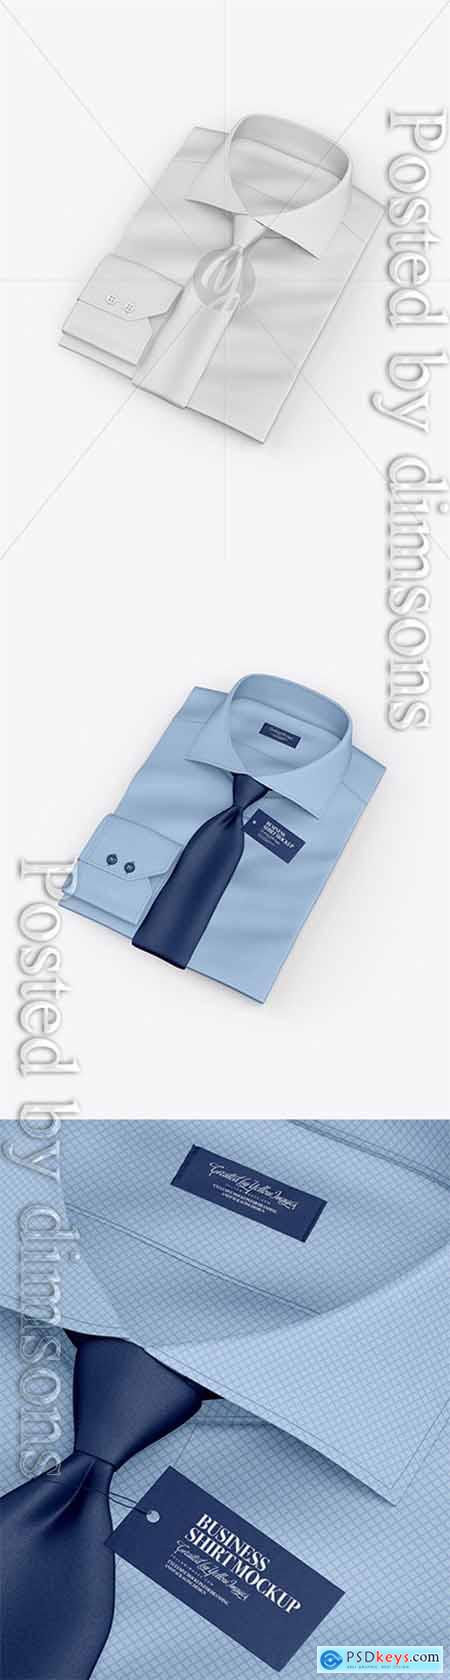 Download Folded Shirt With Tie Mockup Half Side View High Angle Shot Free Download Photoshop Vector Stock Image Via Torrent Zippyshare From Psdkeys Com